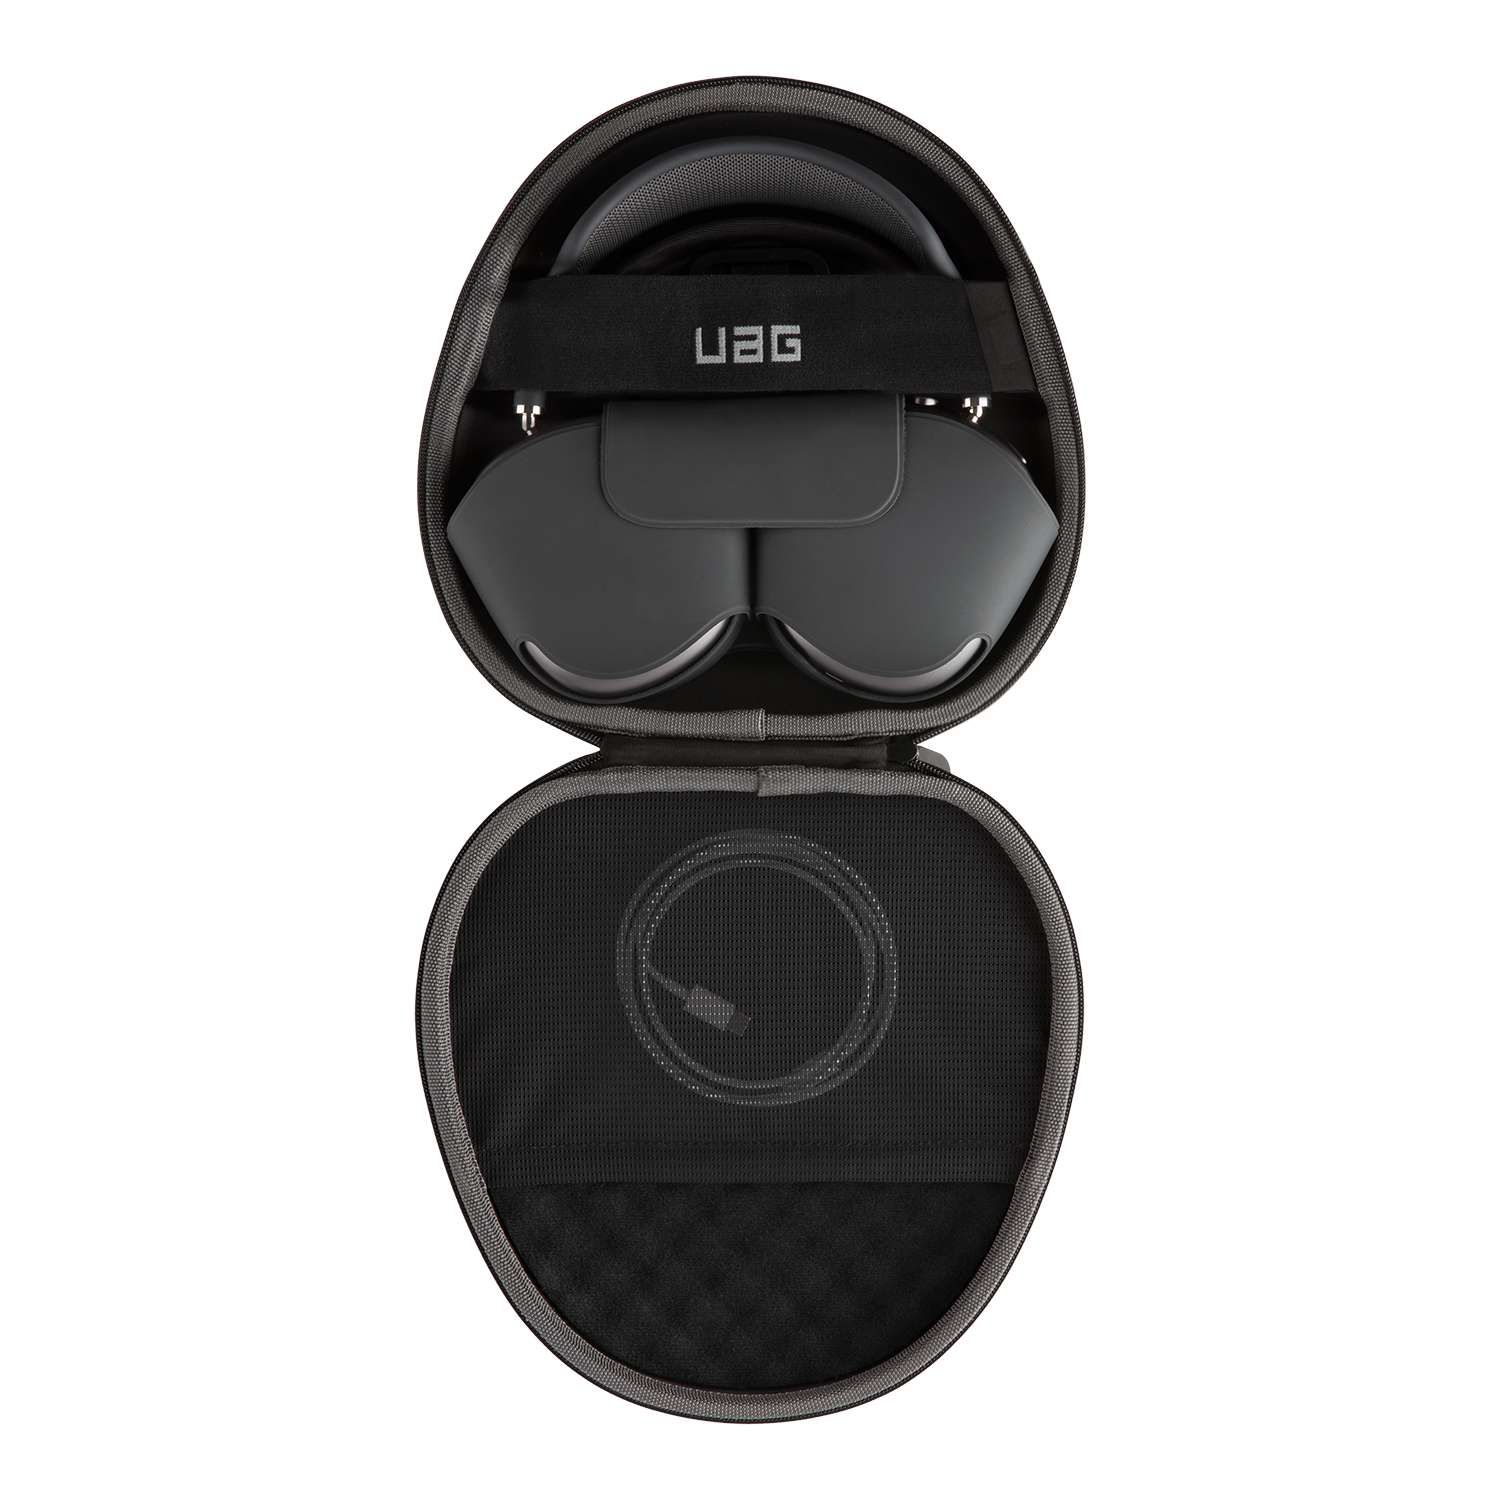  Hộp chống sốc UAG Ration Protective cho Airpods Max 